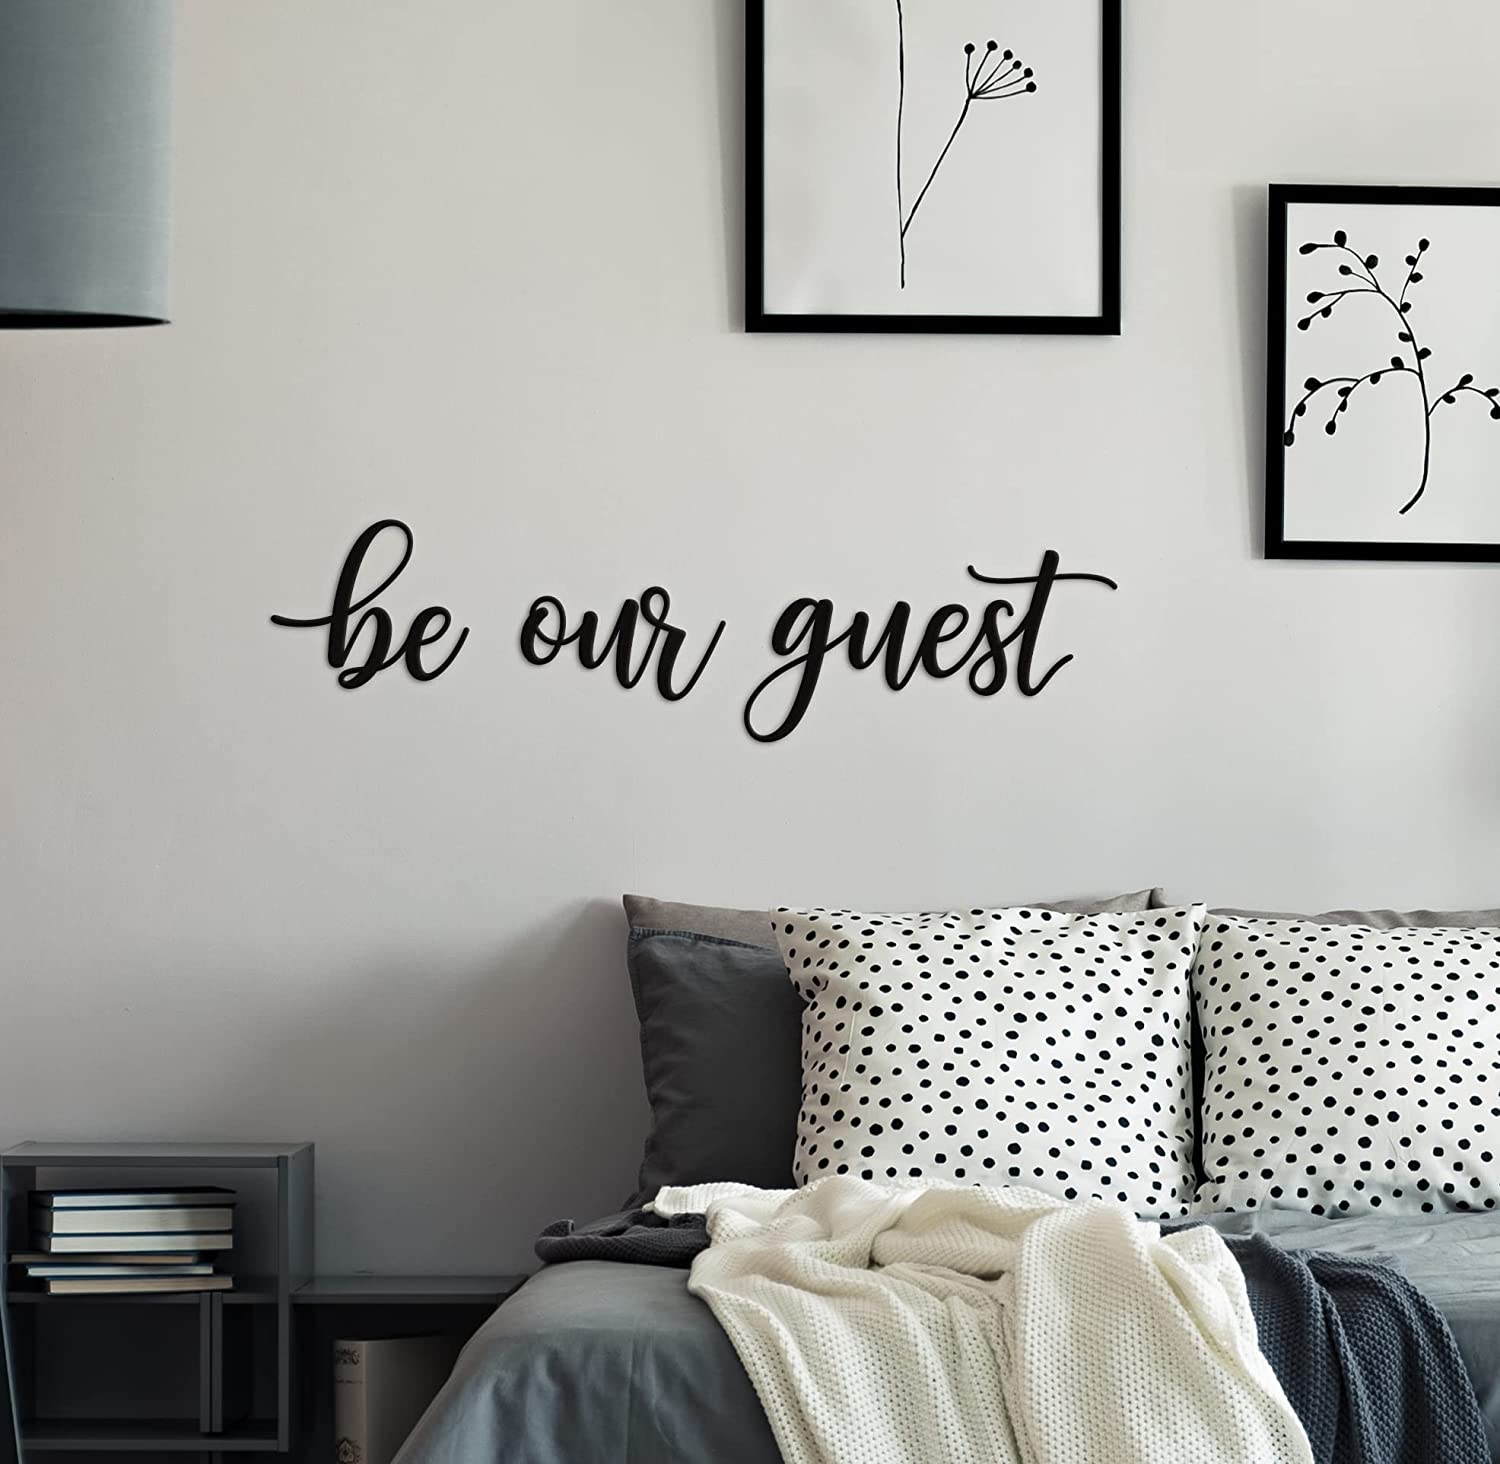 Be Our Guest Sign Metal Wall Art Decor - 43"X10" Black Ideas Be Our Guest Farmhouse Metal Wall Signs